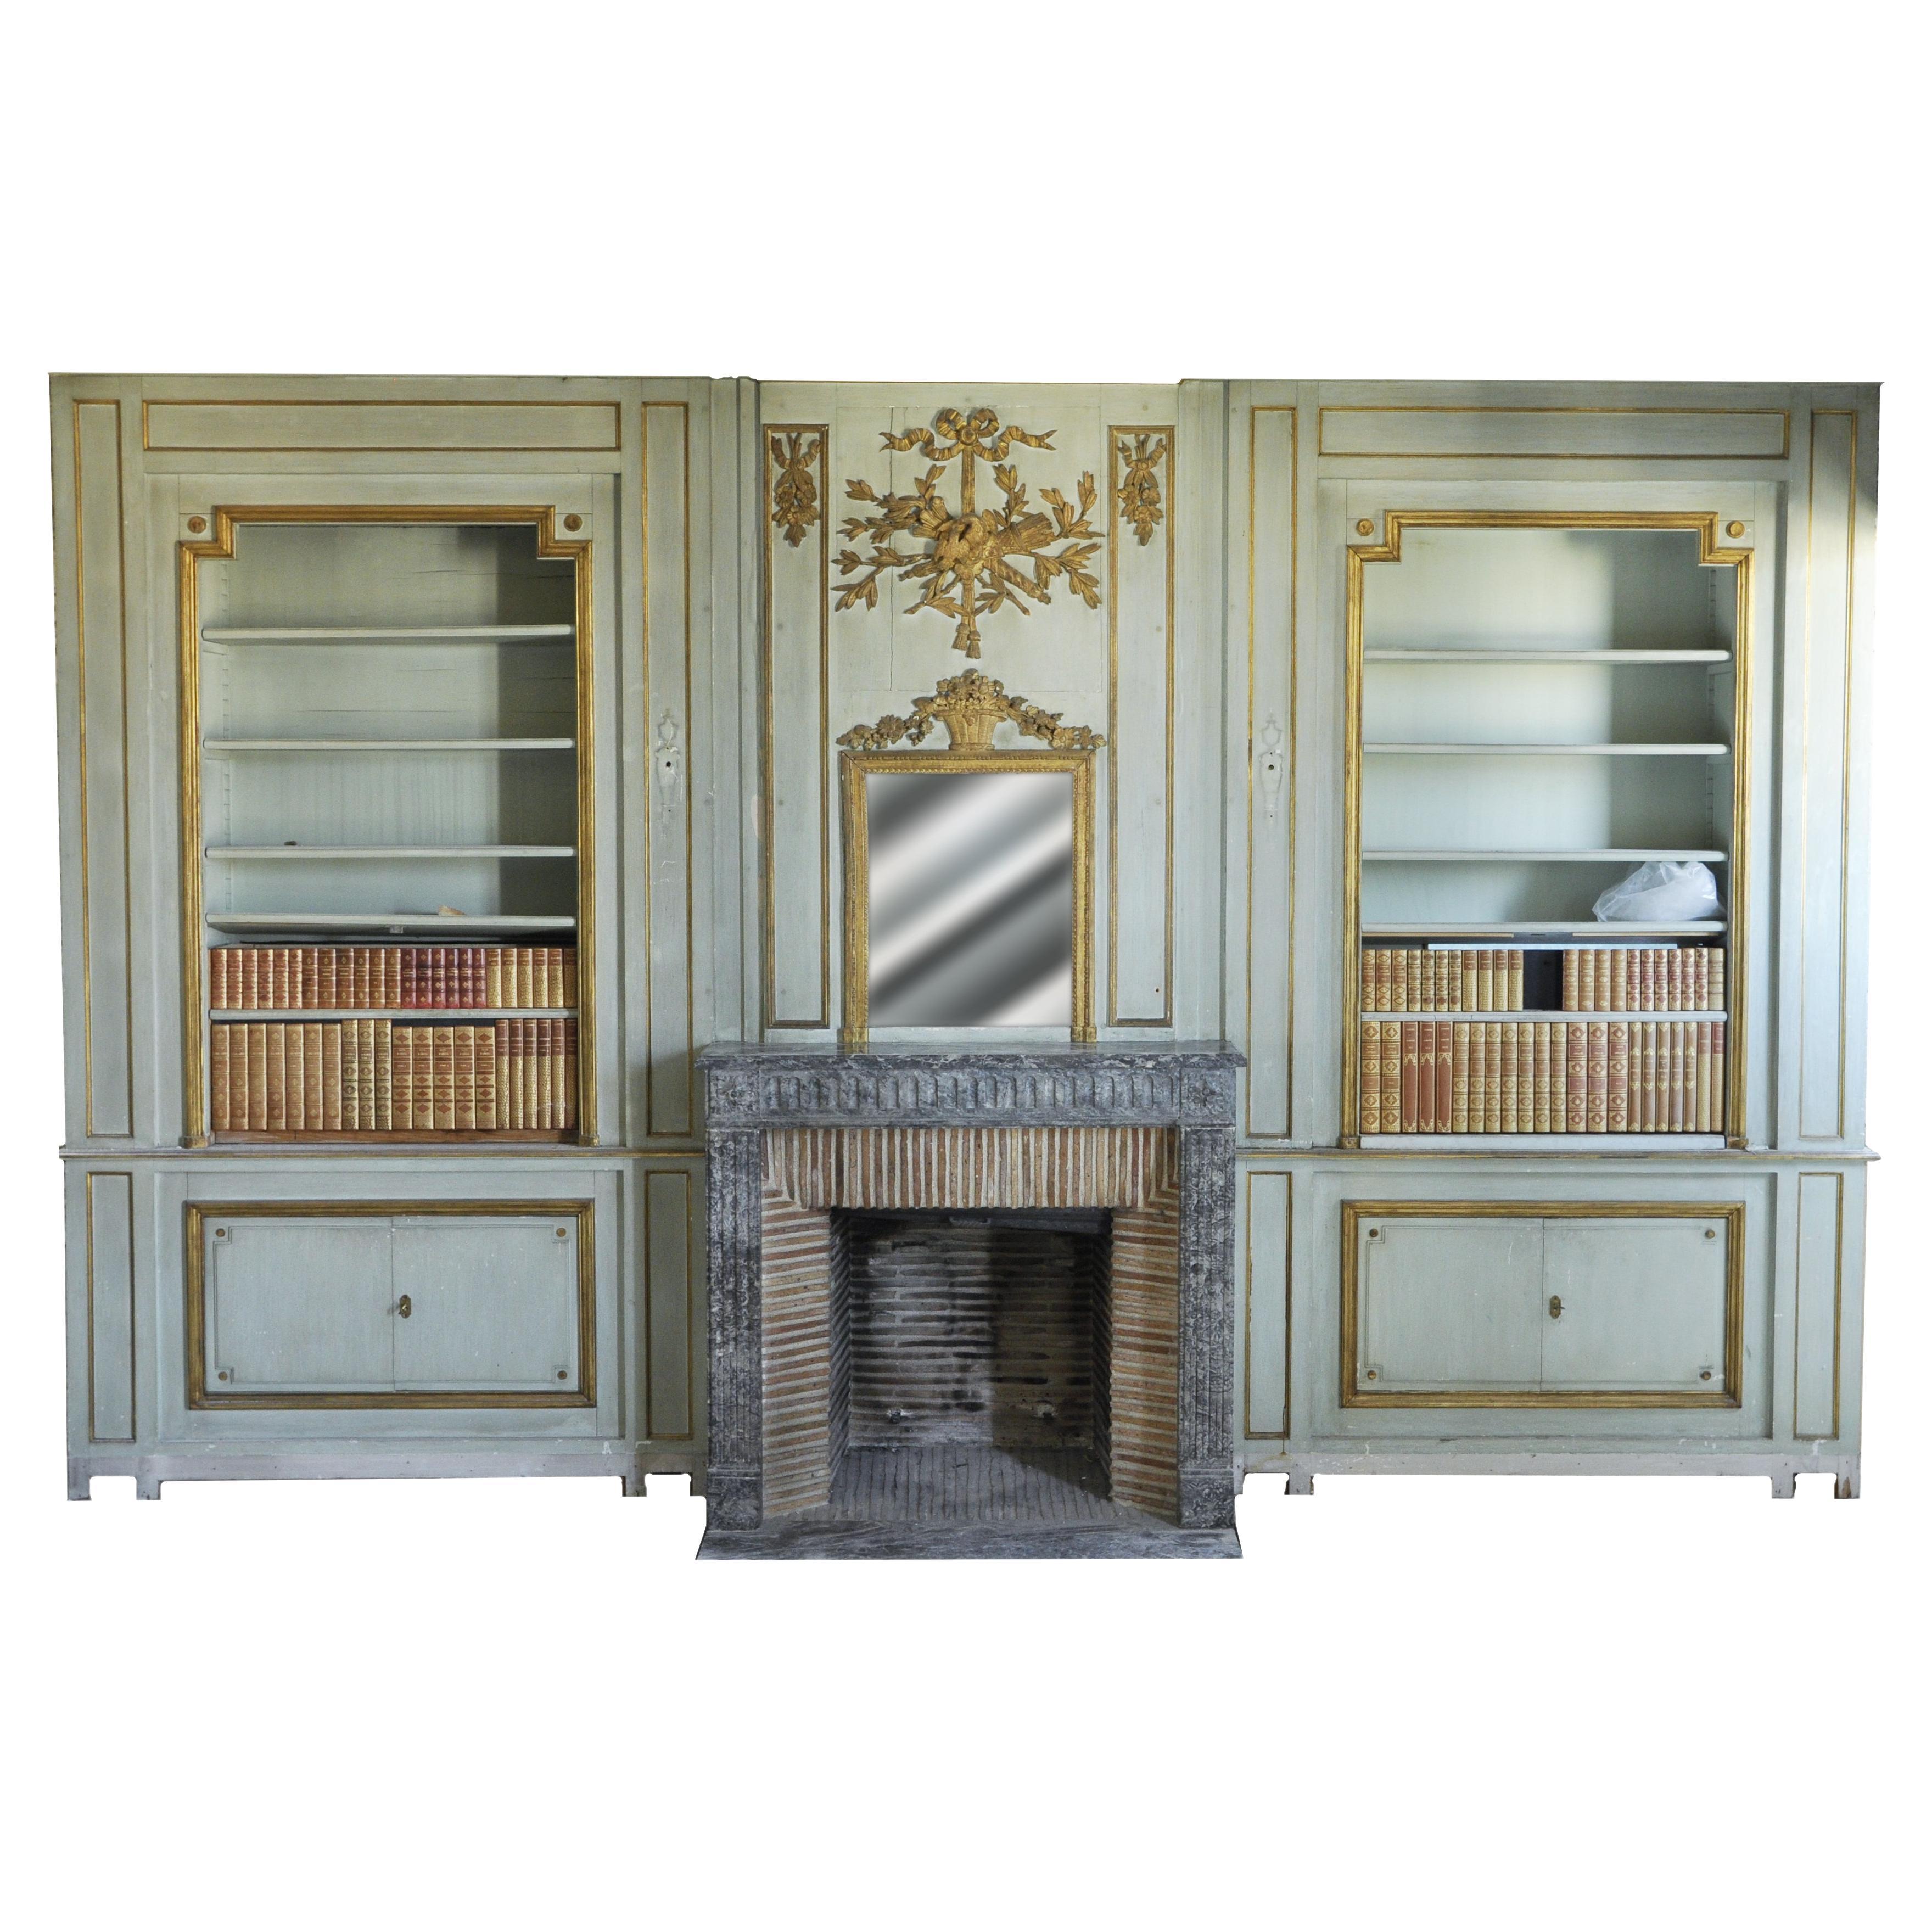 Louis XVI Style Paneling with Louis XVI Period Mantel and Trumeau